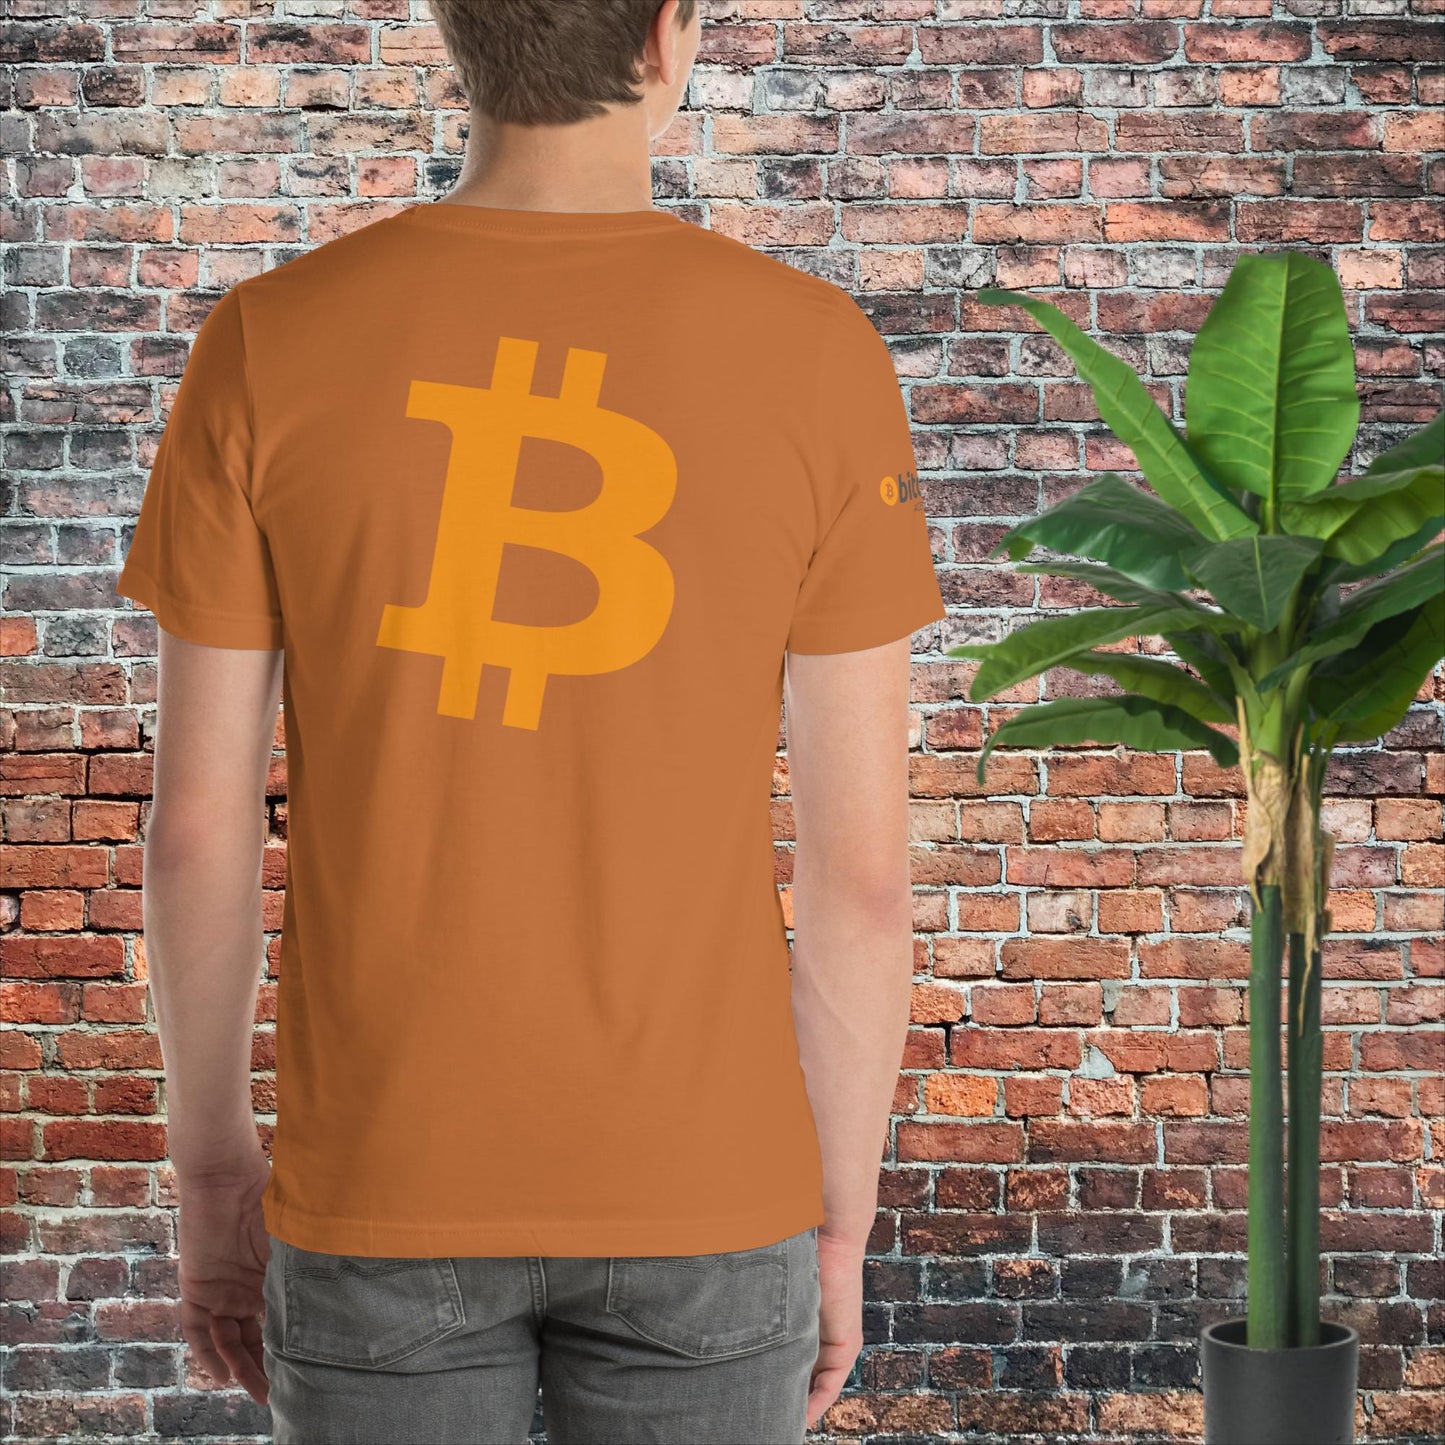 #Bitcoin OG Accepted Here - T-Shirt